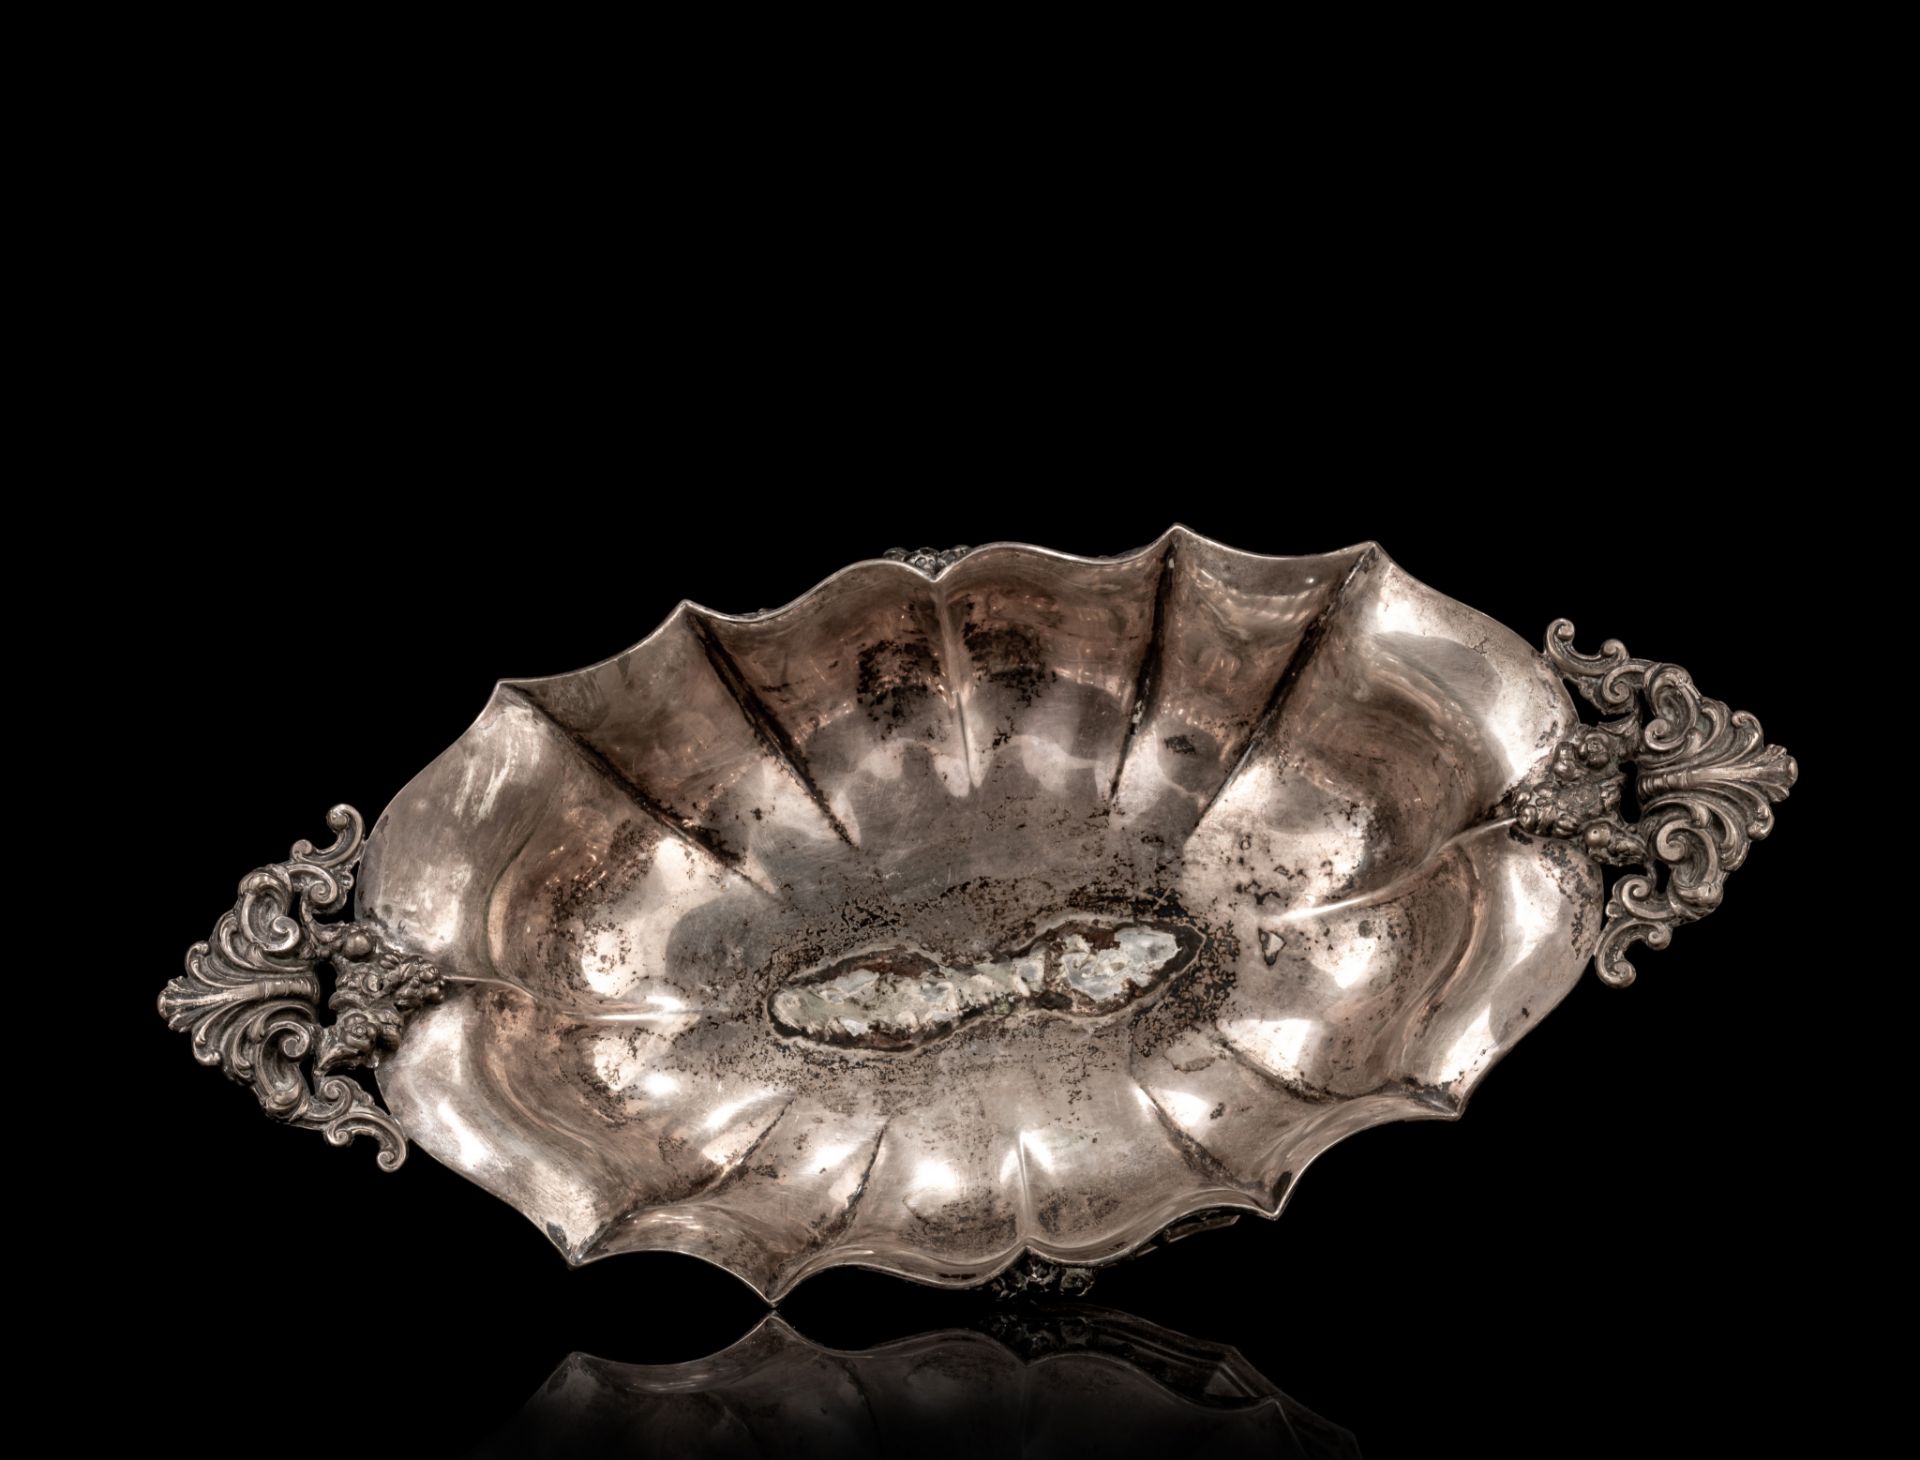 A various silver collection, H 12 - 16,5 cm - total weight: 1.767 g - Image 7 of 18